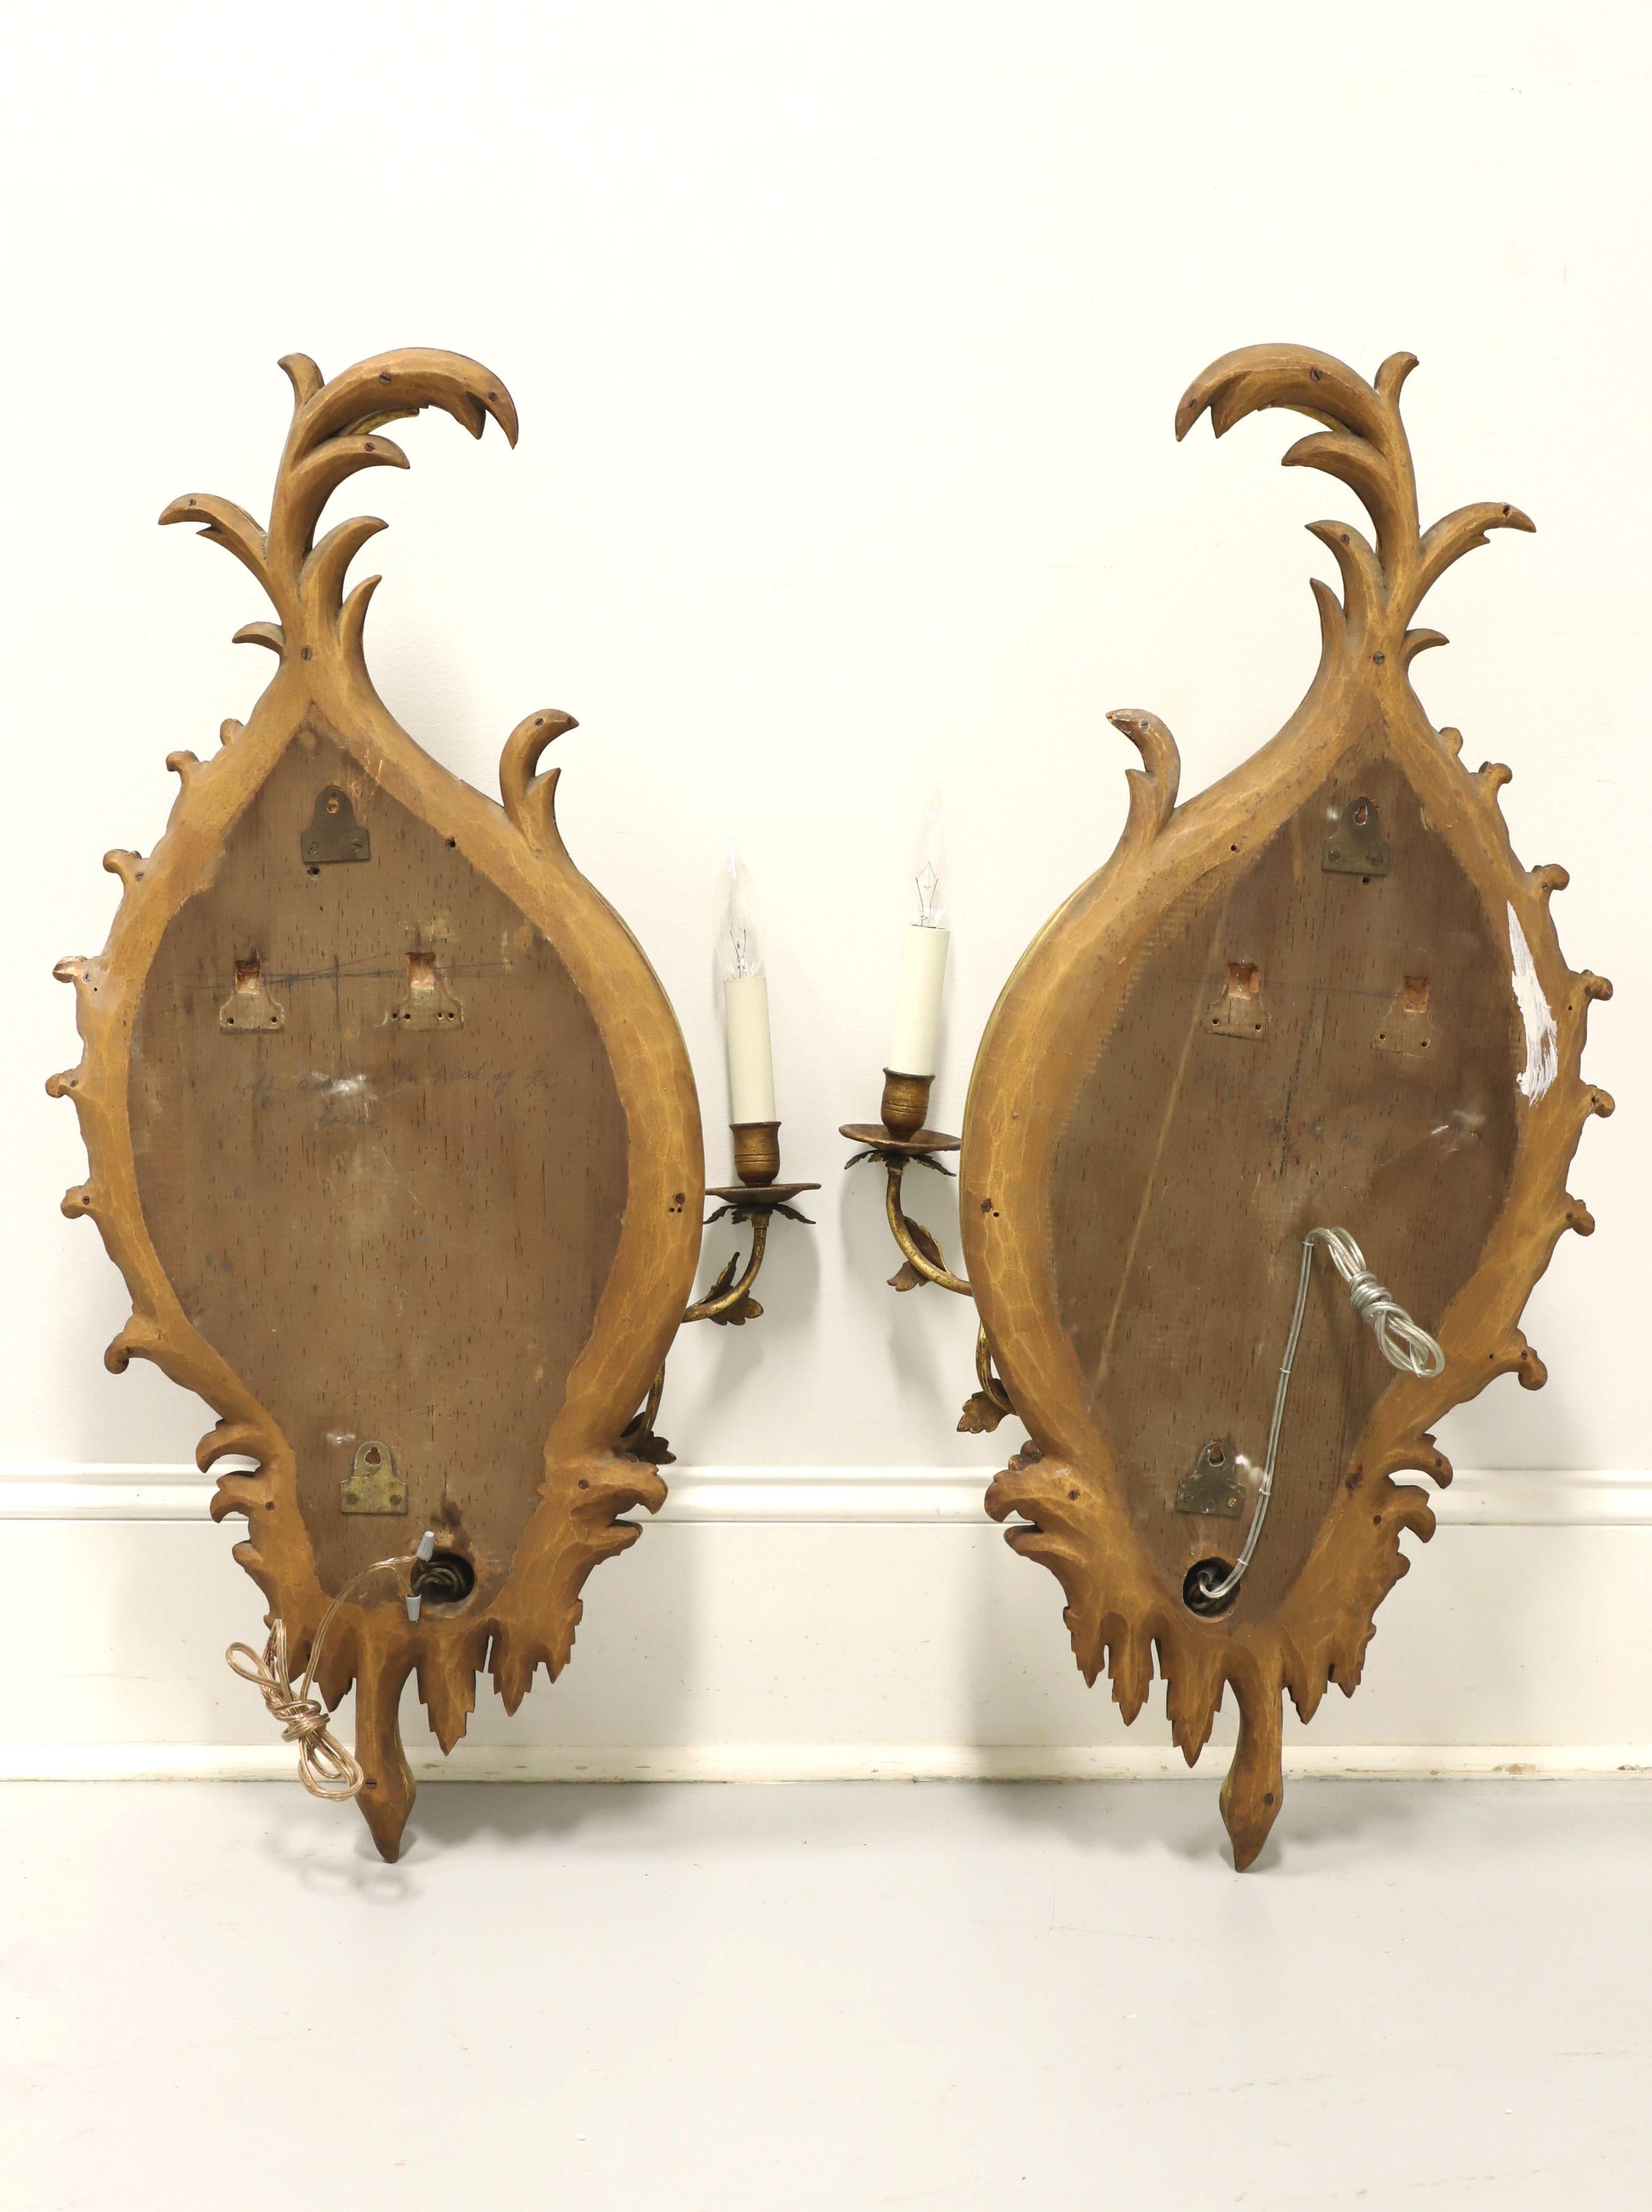 Early 20th Century Carved Wood Electrified Candle Mirror Wall Sconces - Pair B 5